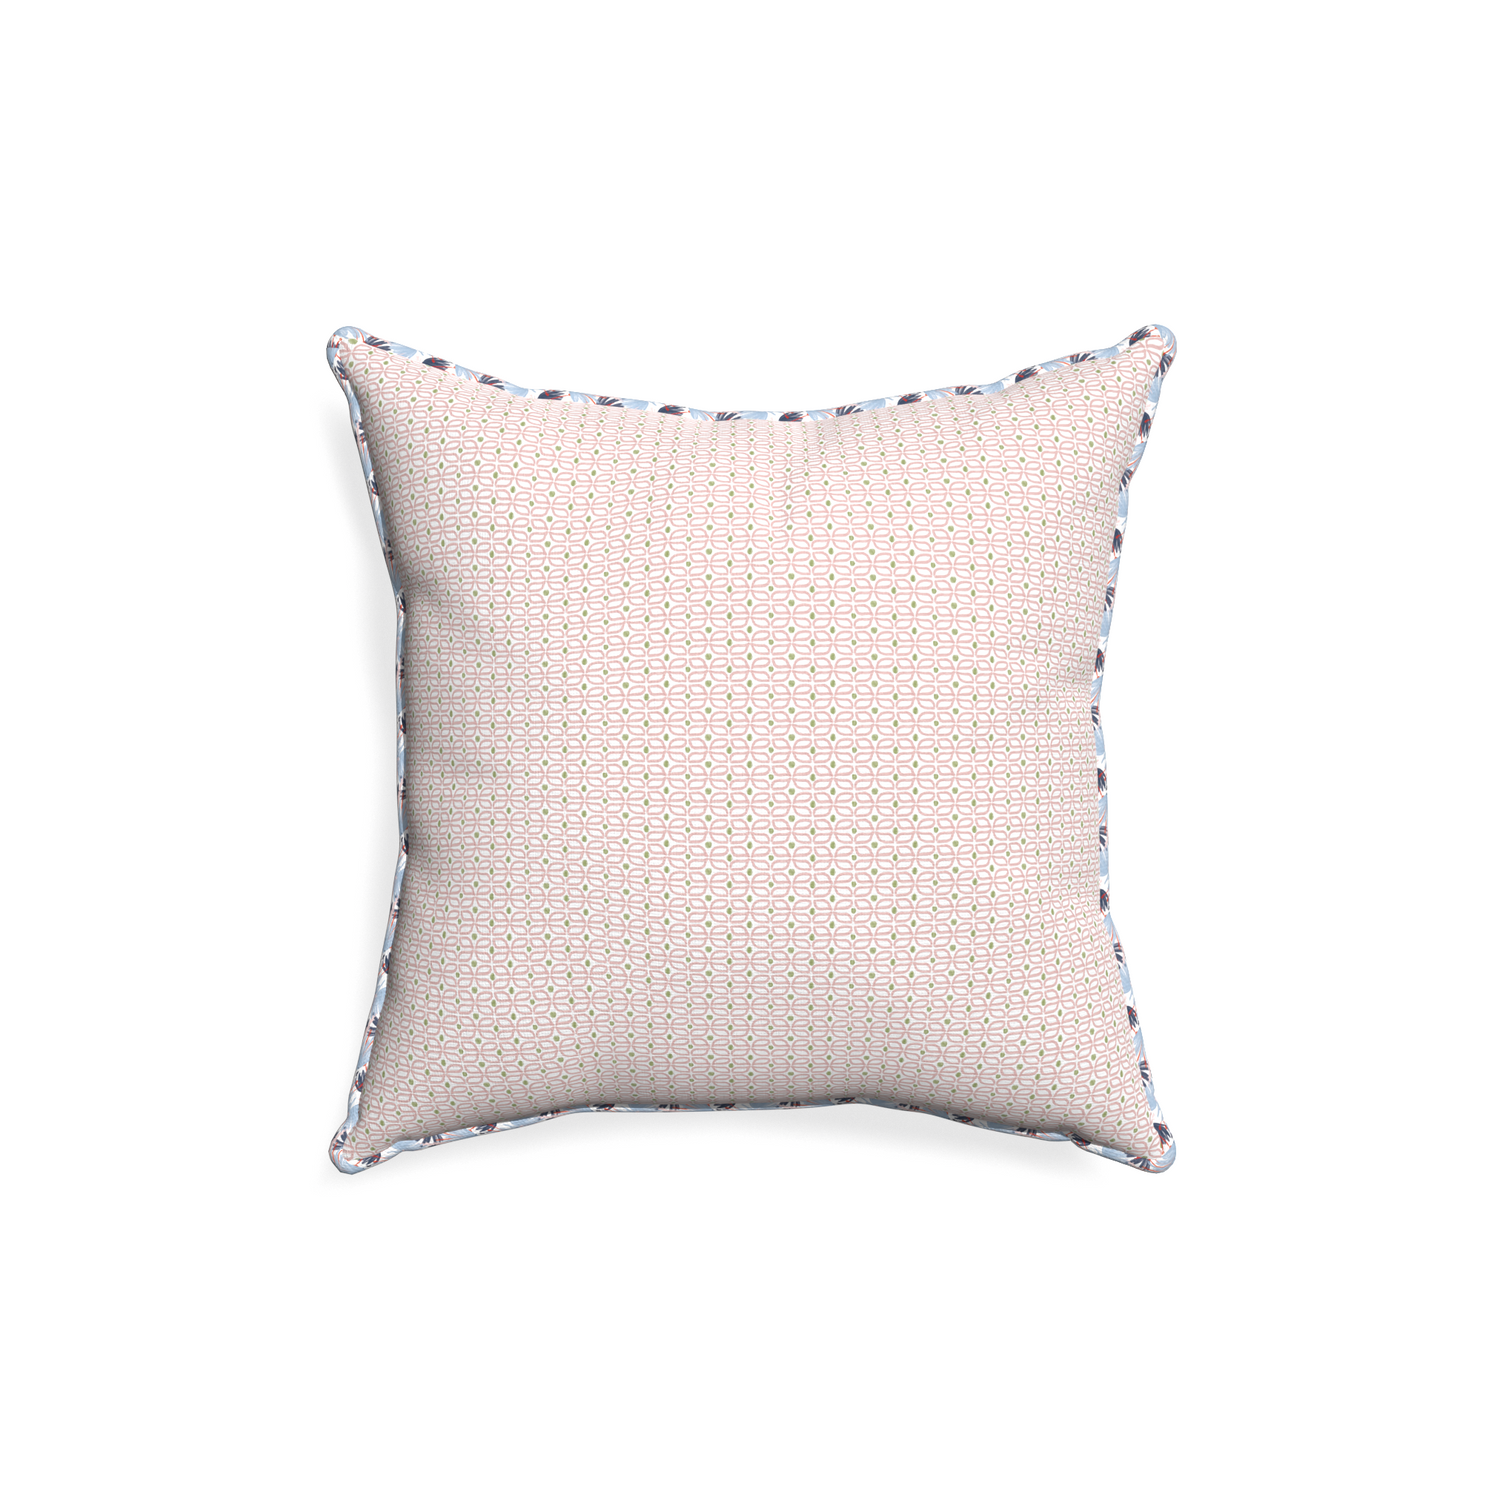 18-square loomi pink custom pillow with e piping on white background